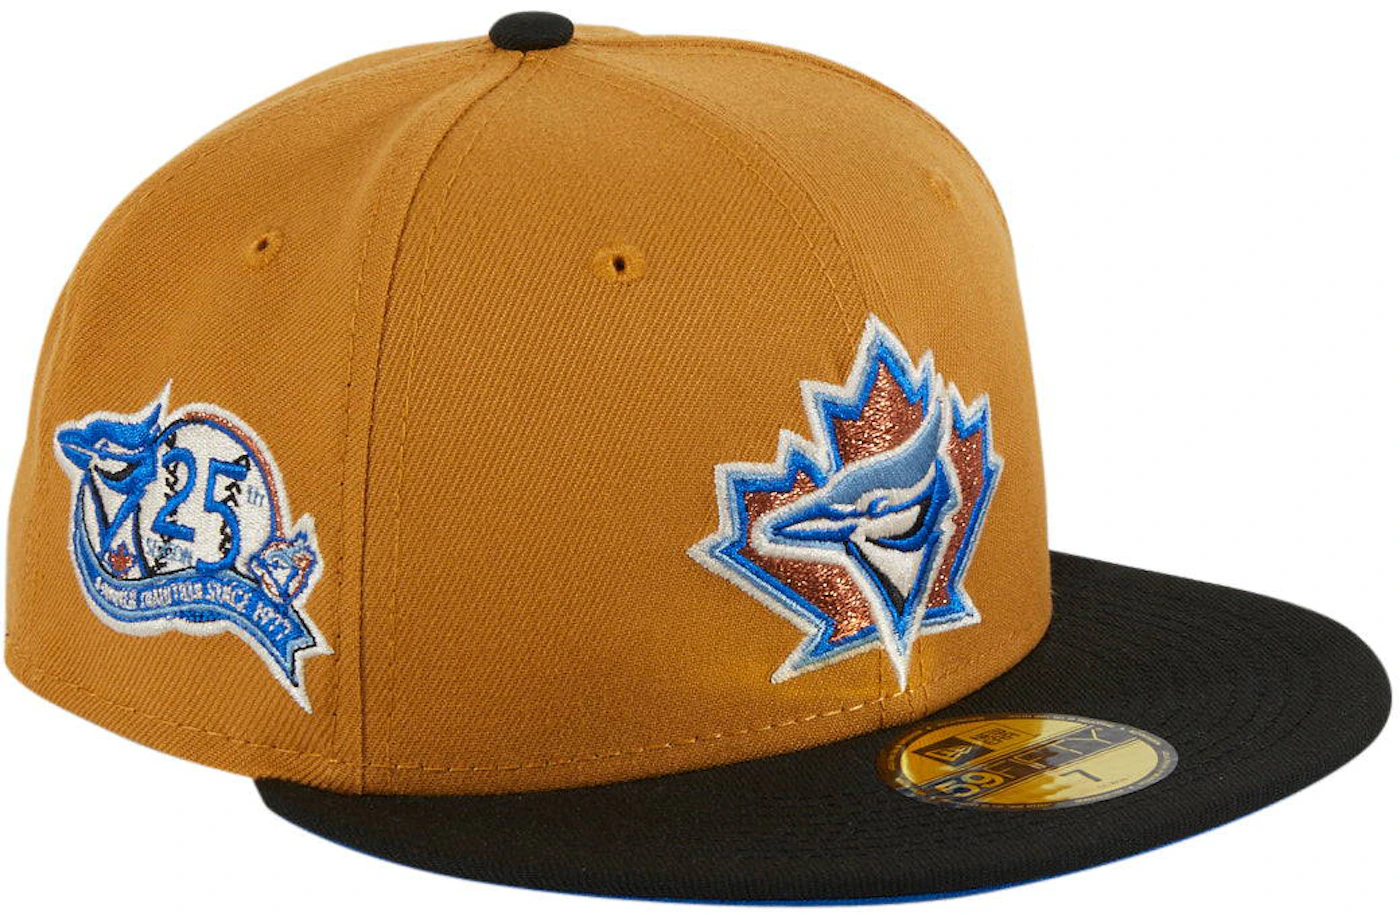 Exclusive Fitted Off-White Maroon Toronto Blue Jays New Era Fitted Hat 7 3/4